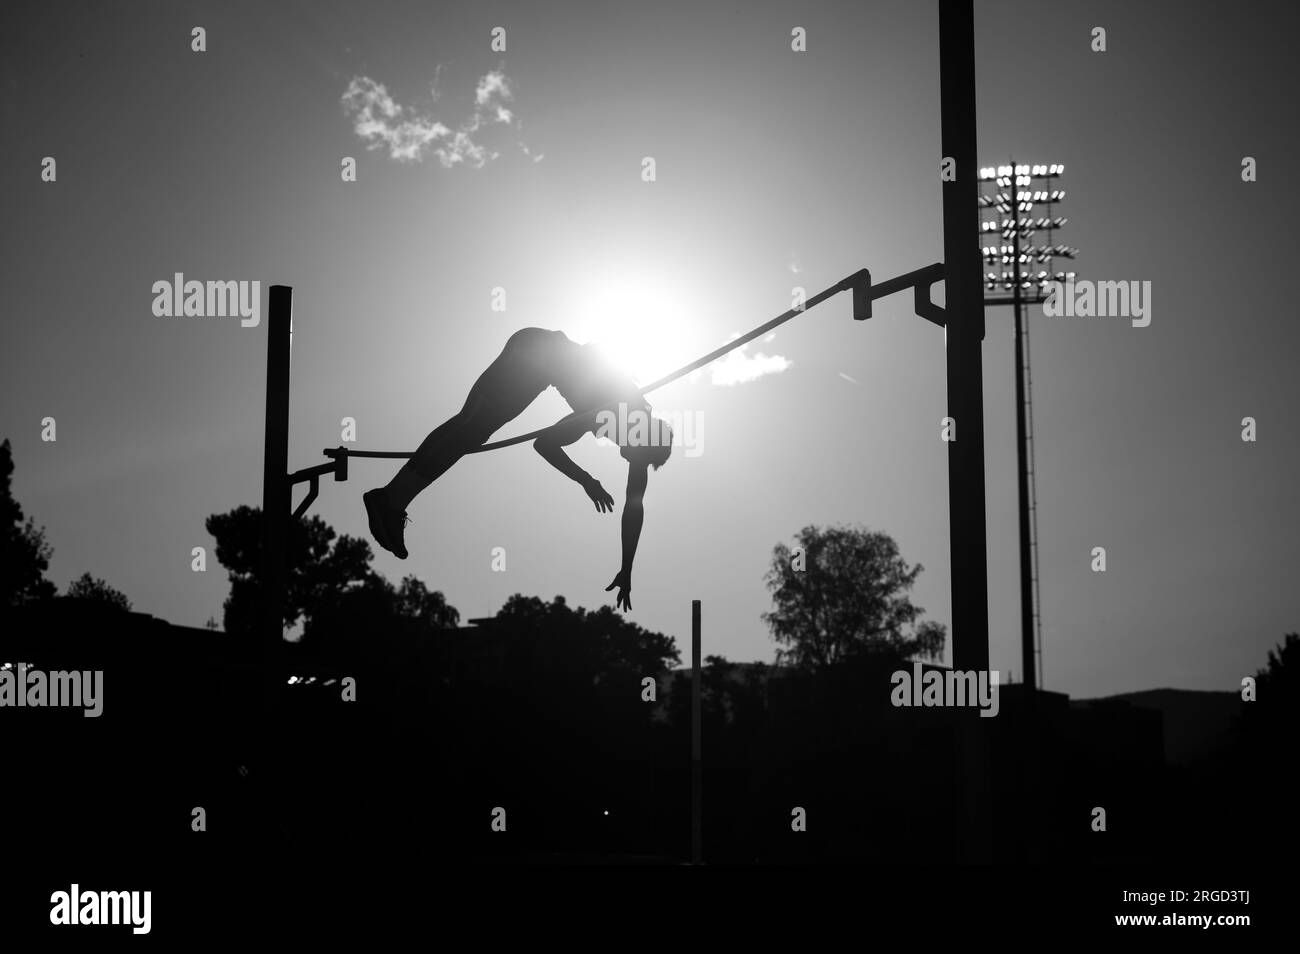 Soaring Heights: Capturing the Elegance of a Pole Vault Silhouette. Stock Photo